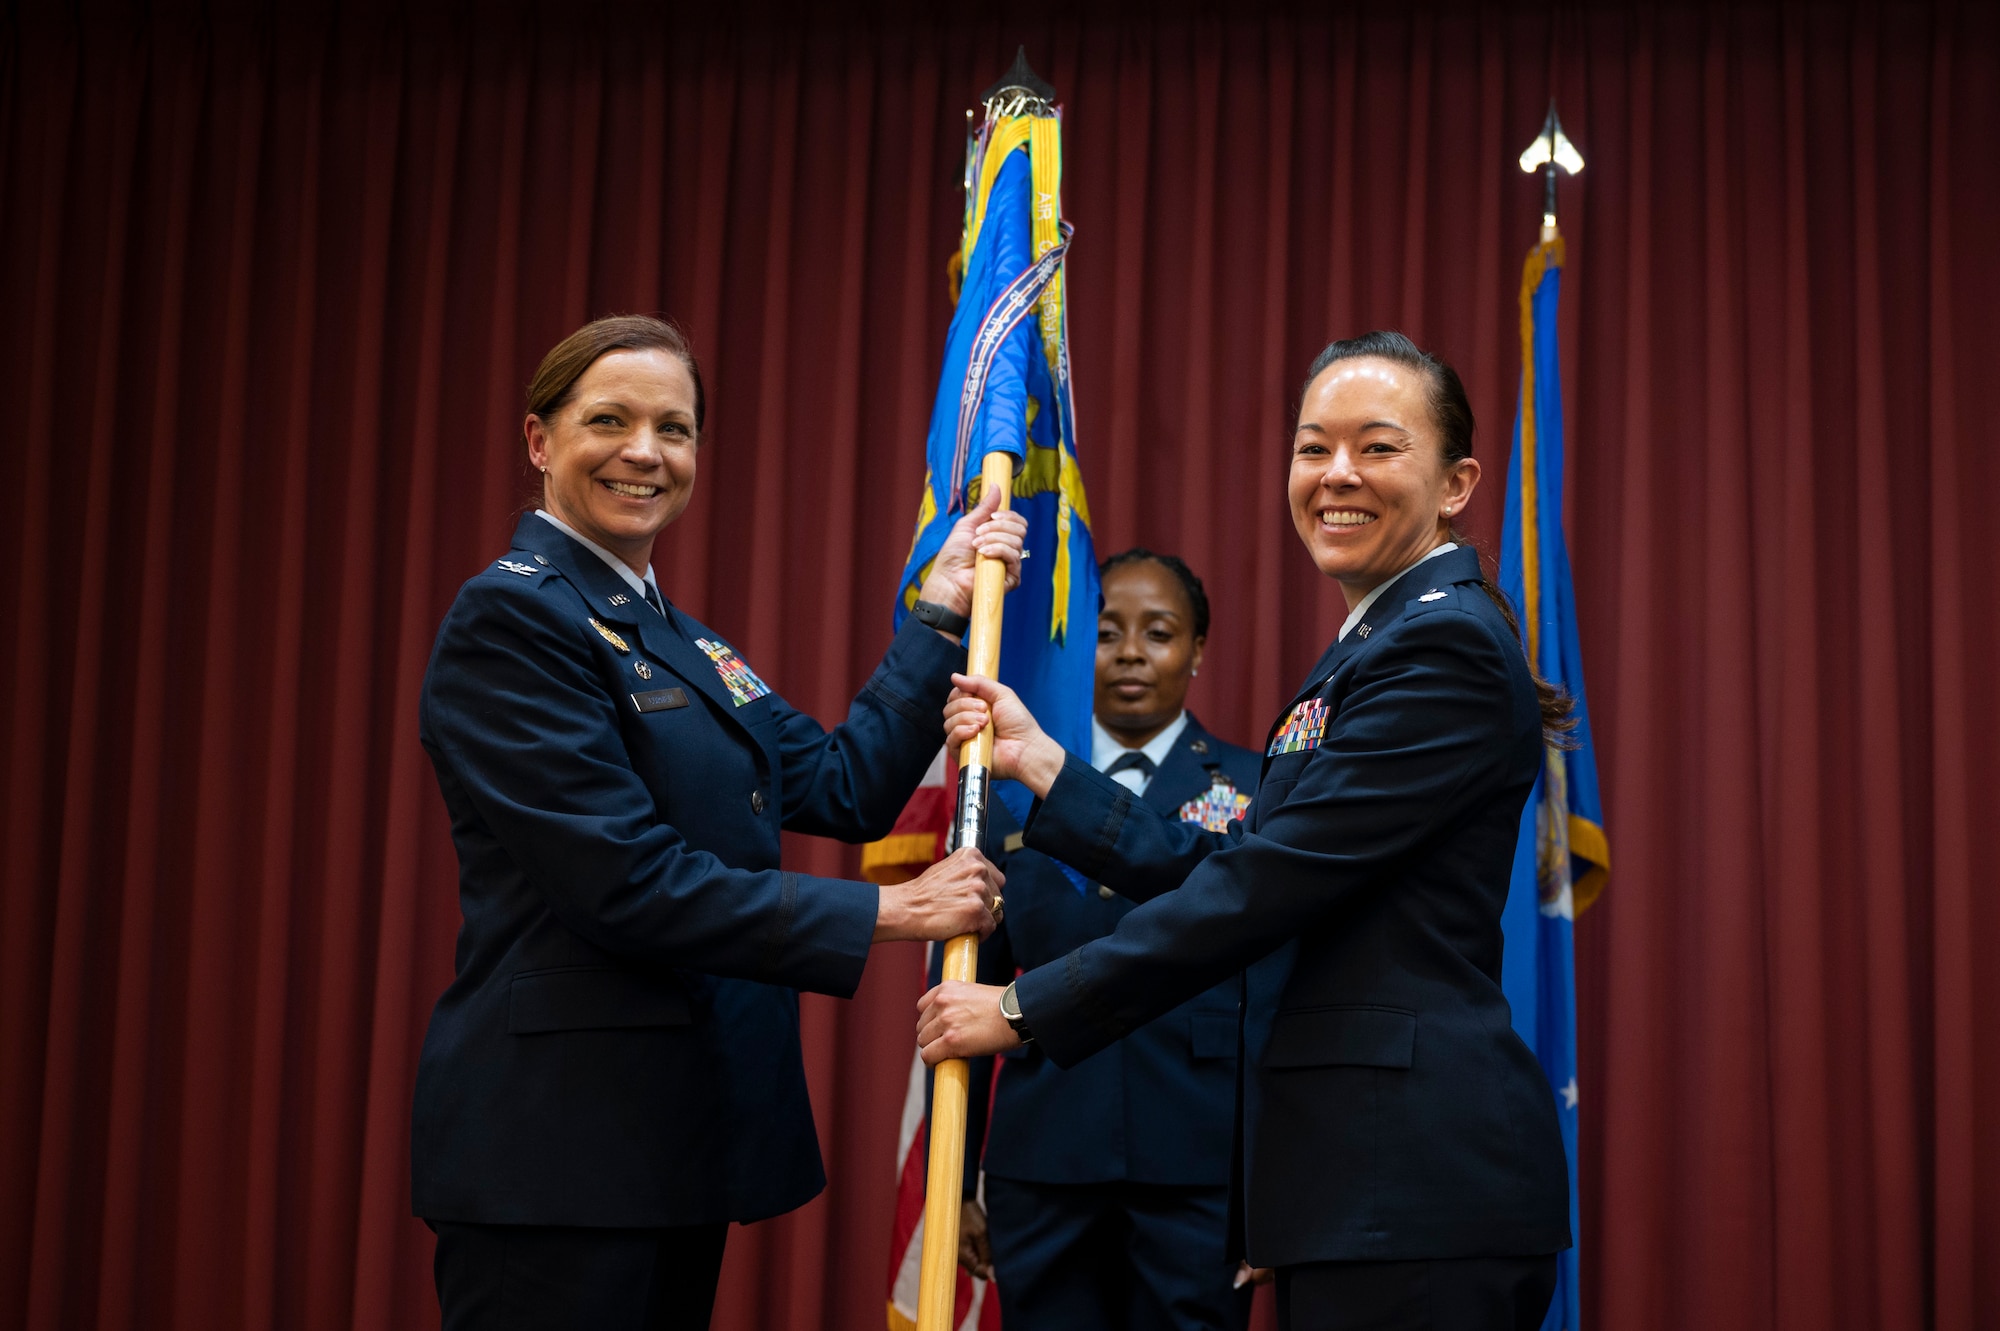 A woman passes a guidon to another woman.